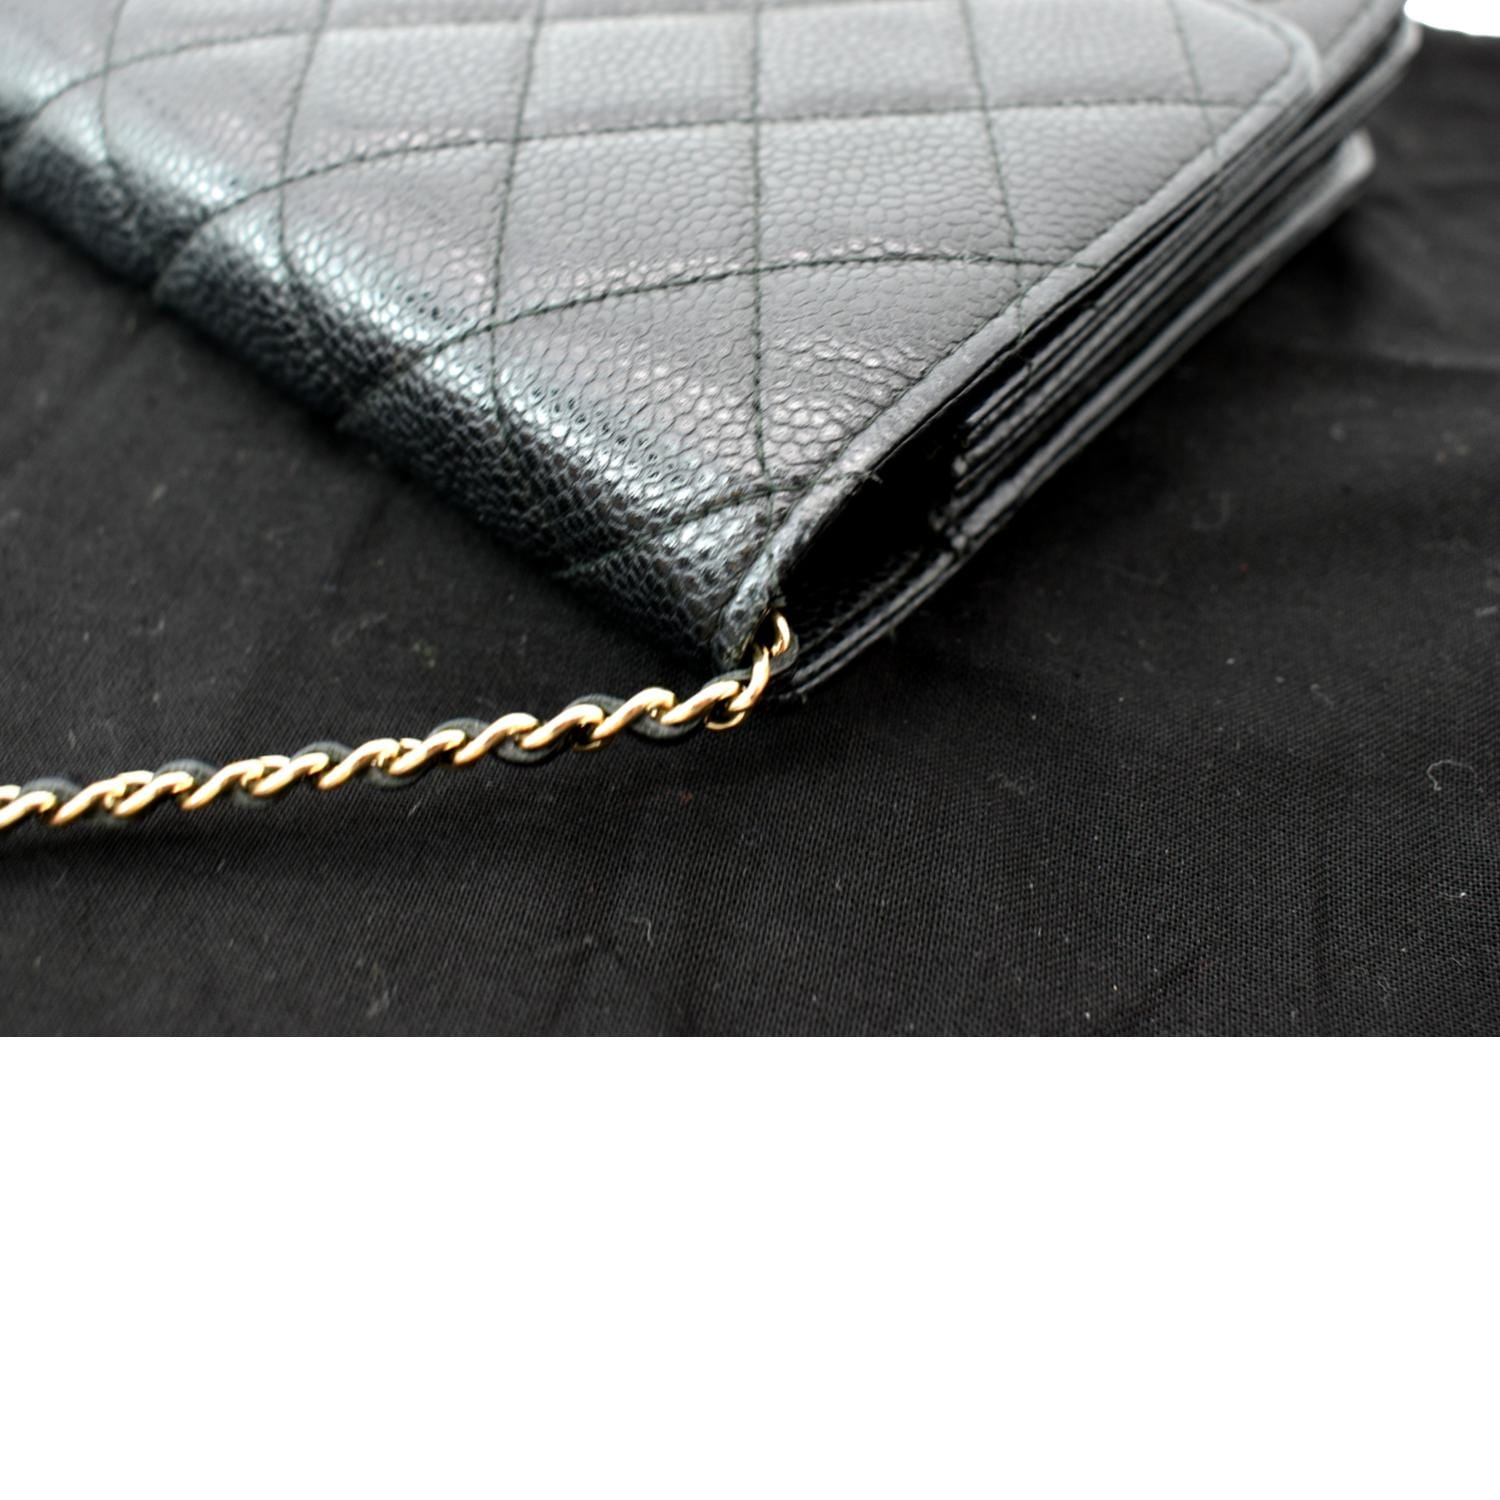 CHANEL Golden Class Caviar Leather Wallet on Chain Bag Black